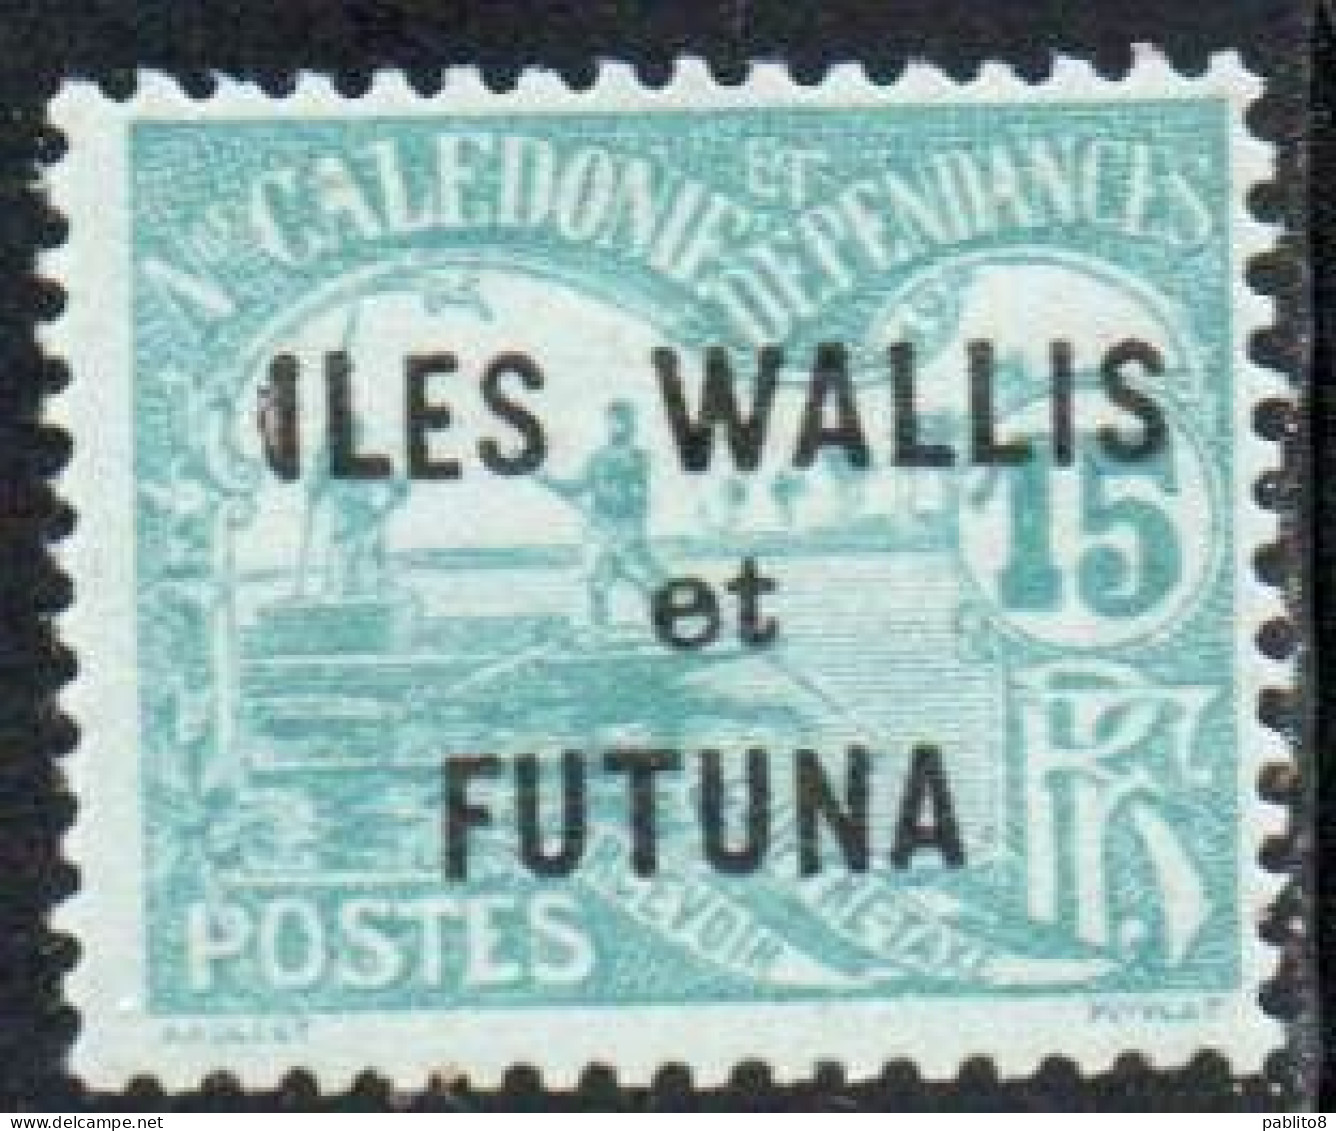 WALLIS AND FUTUNA ISLANDS 1920 POSTAGE DUE STAMPS TAXE SEGNATASSE MEN POLING BOAT NEW CALEDONIA OVERPRINTED 15c MNH - Postage Due